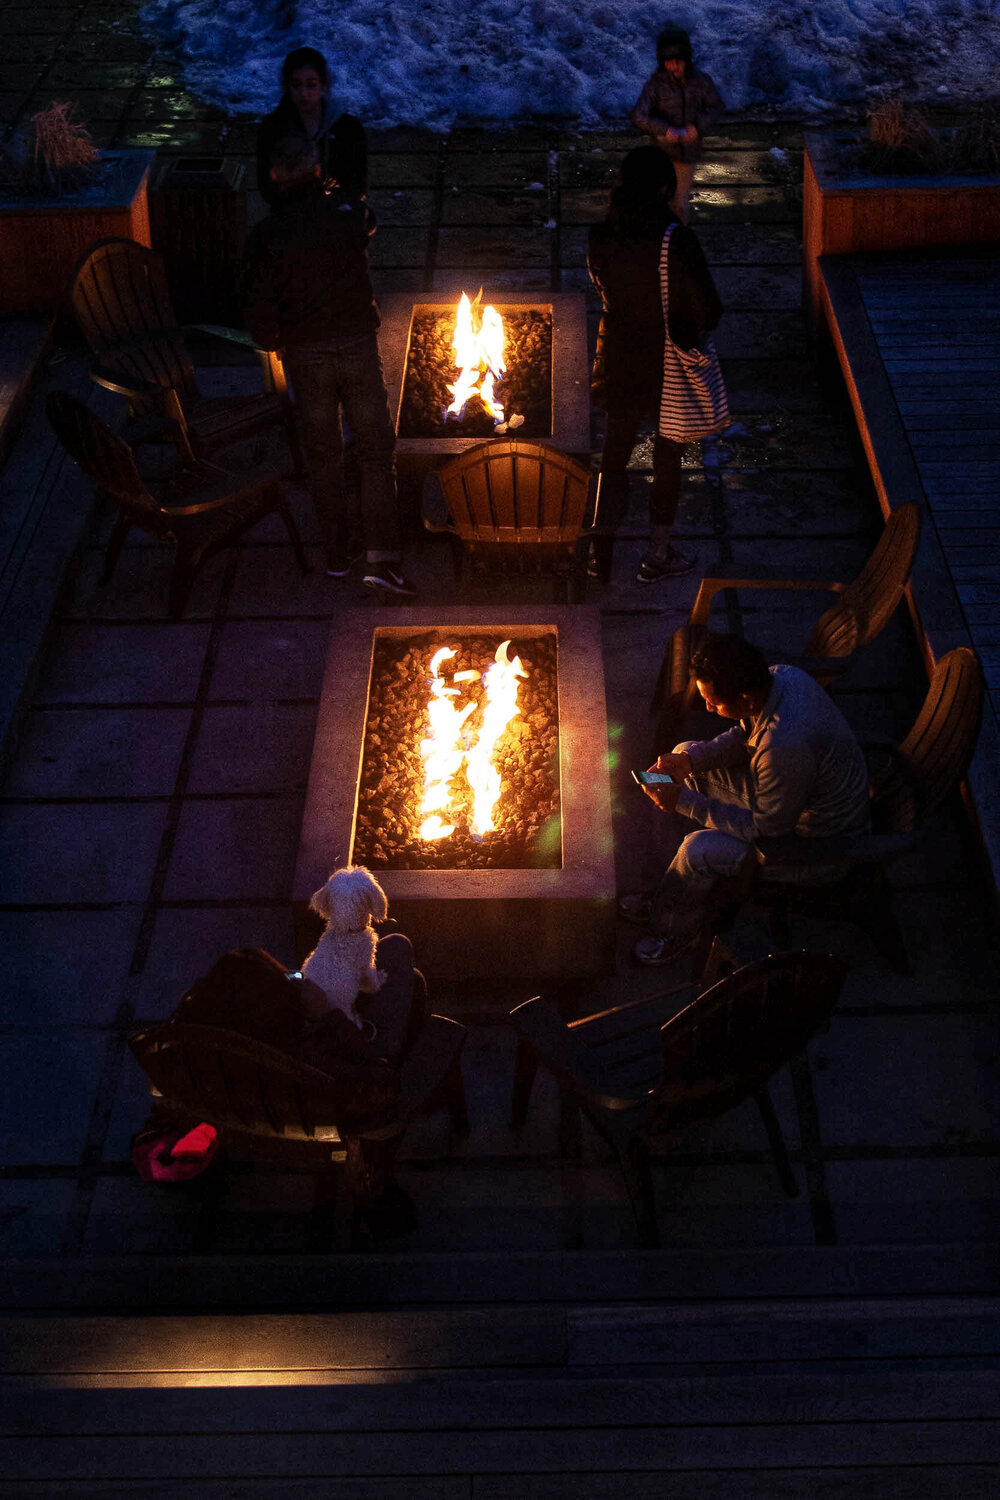  Relaxing around the fire pit at the Coachman Hotel in South Lake Tahoe, CA.  © Ski Travel Go  